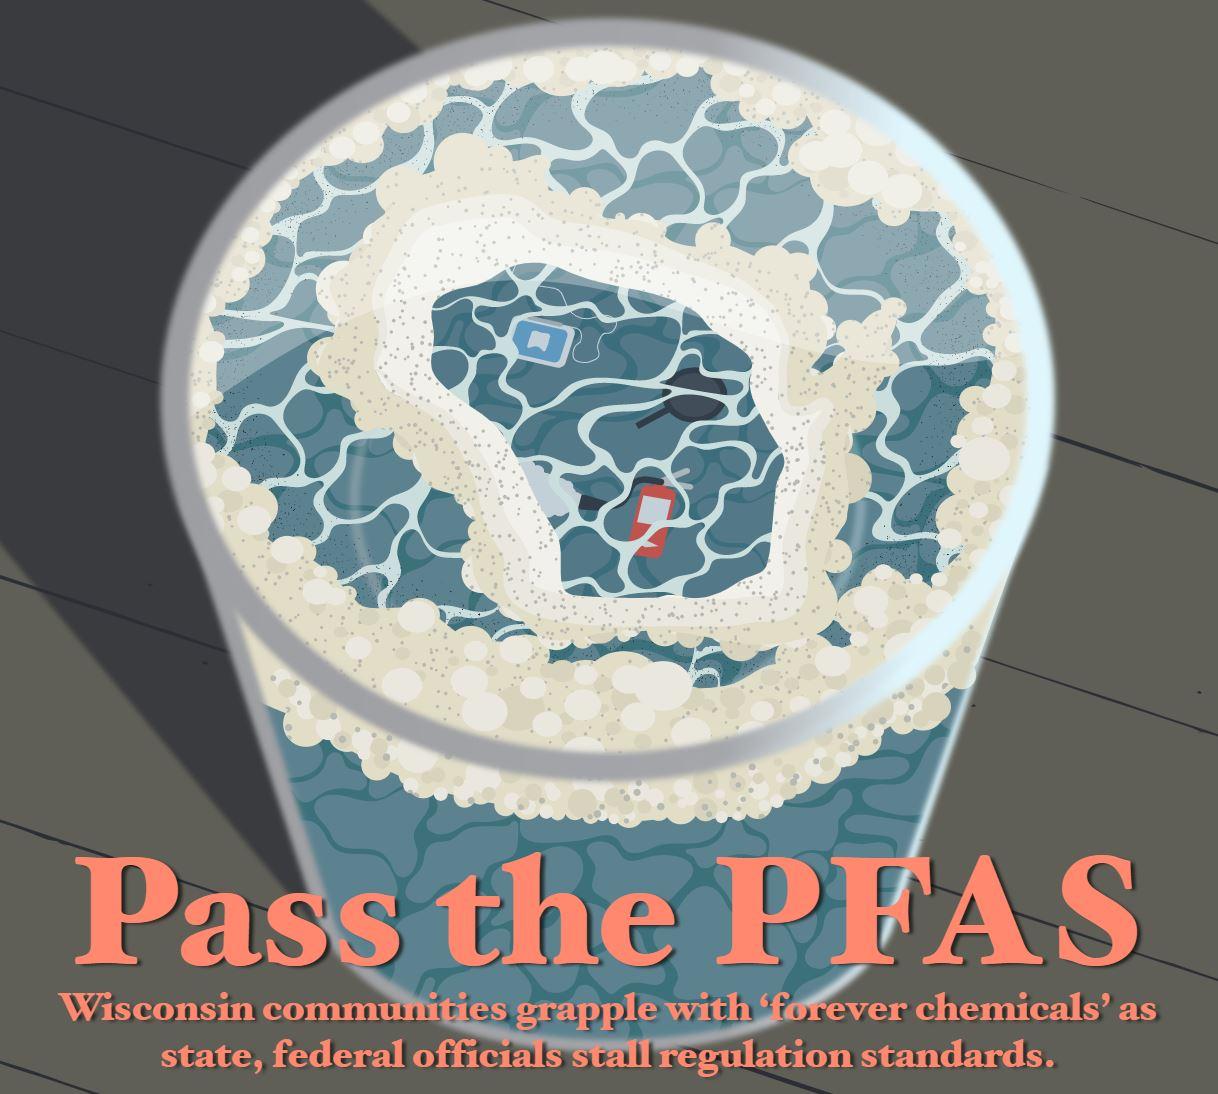 Pass+the+PFAS%3A+Wisconsin+communities+grapple+with+%E2%80%98forever+chemicals%E2%80%99+as+state%2C+federal+officials+stall+regulation+standards